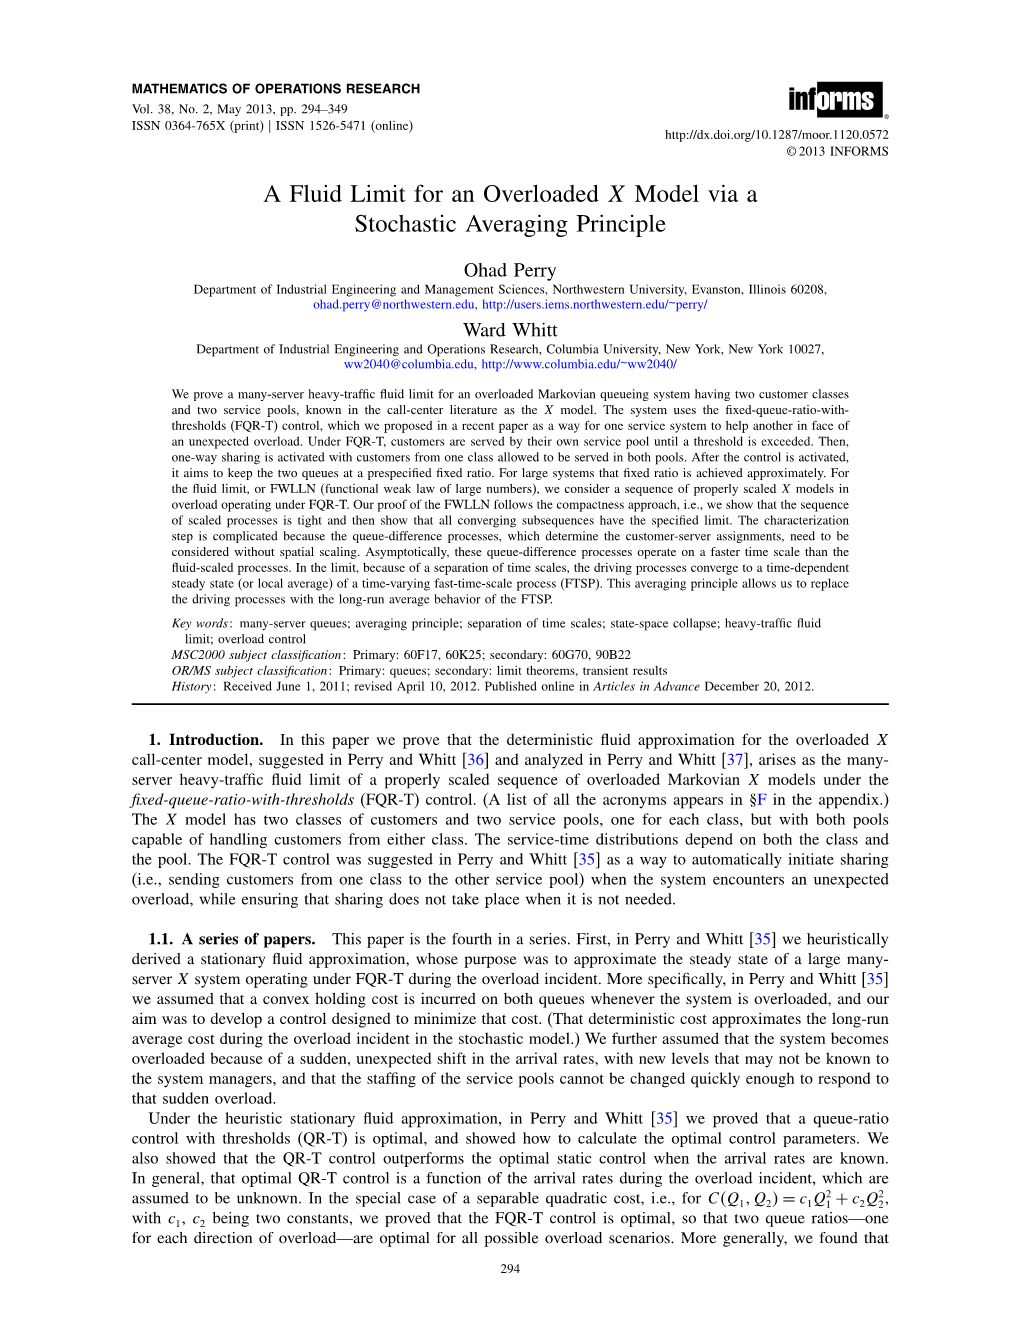 A Fluid Limit for an Overloaded X Model Via a Stochastic Averaging Principle